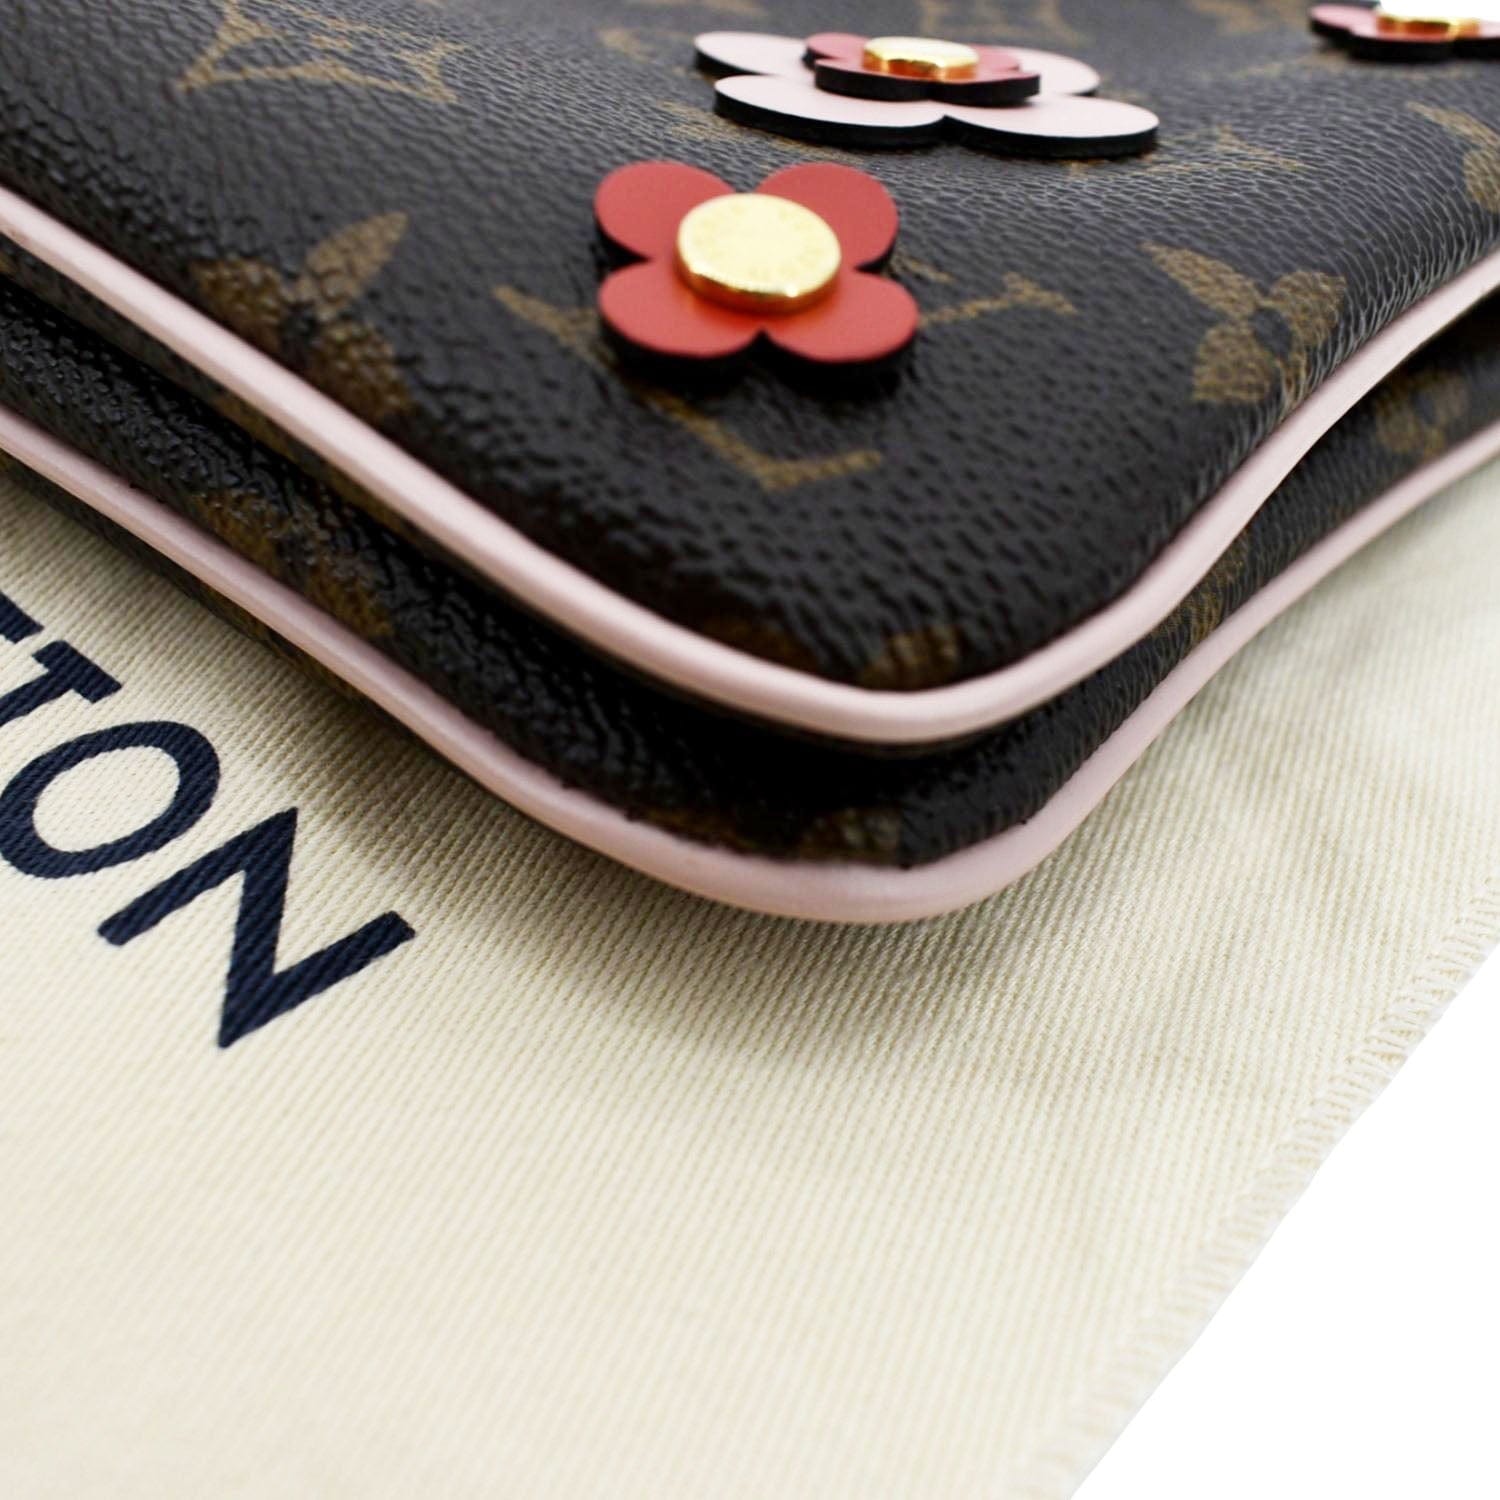 vuitton blooming flowers